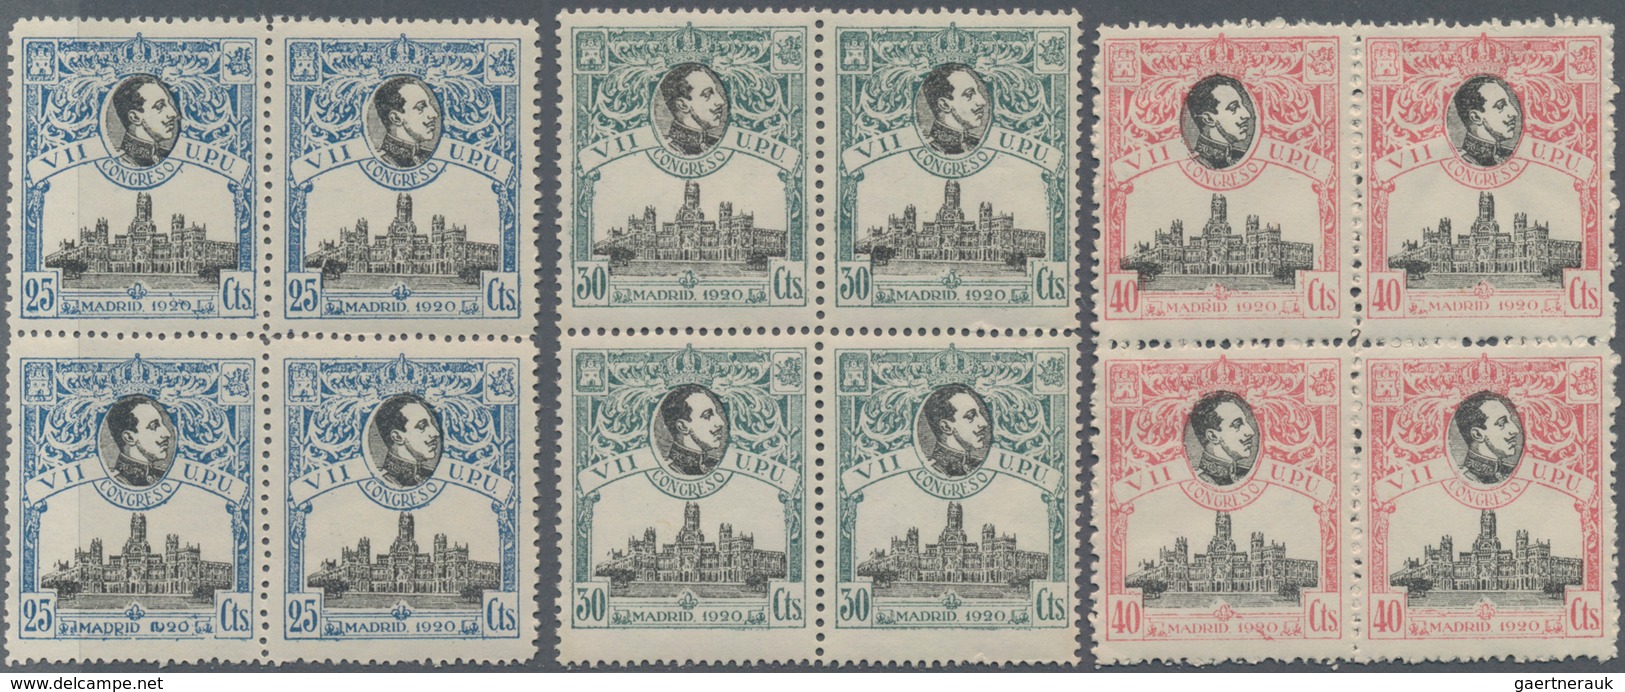 Spanien: 1920, 7th United Postal Union Congress complete set in blocks of four with 1c. + 2c. withou